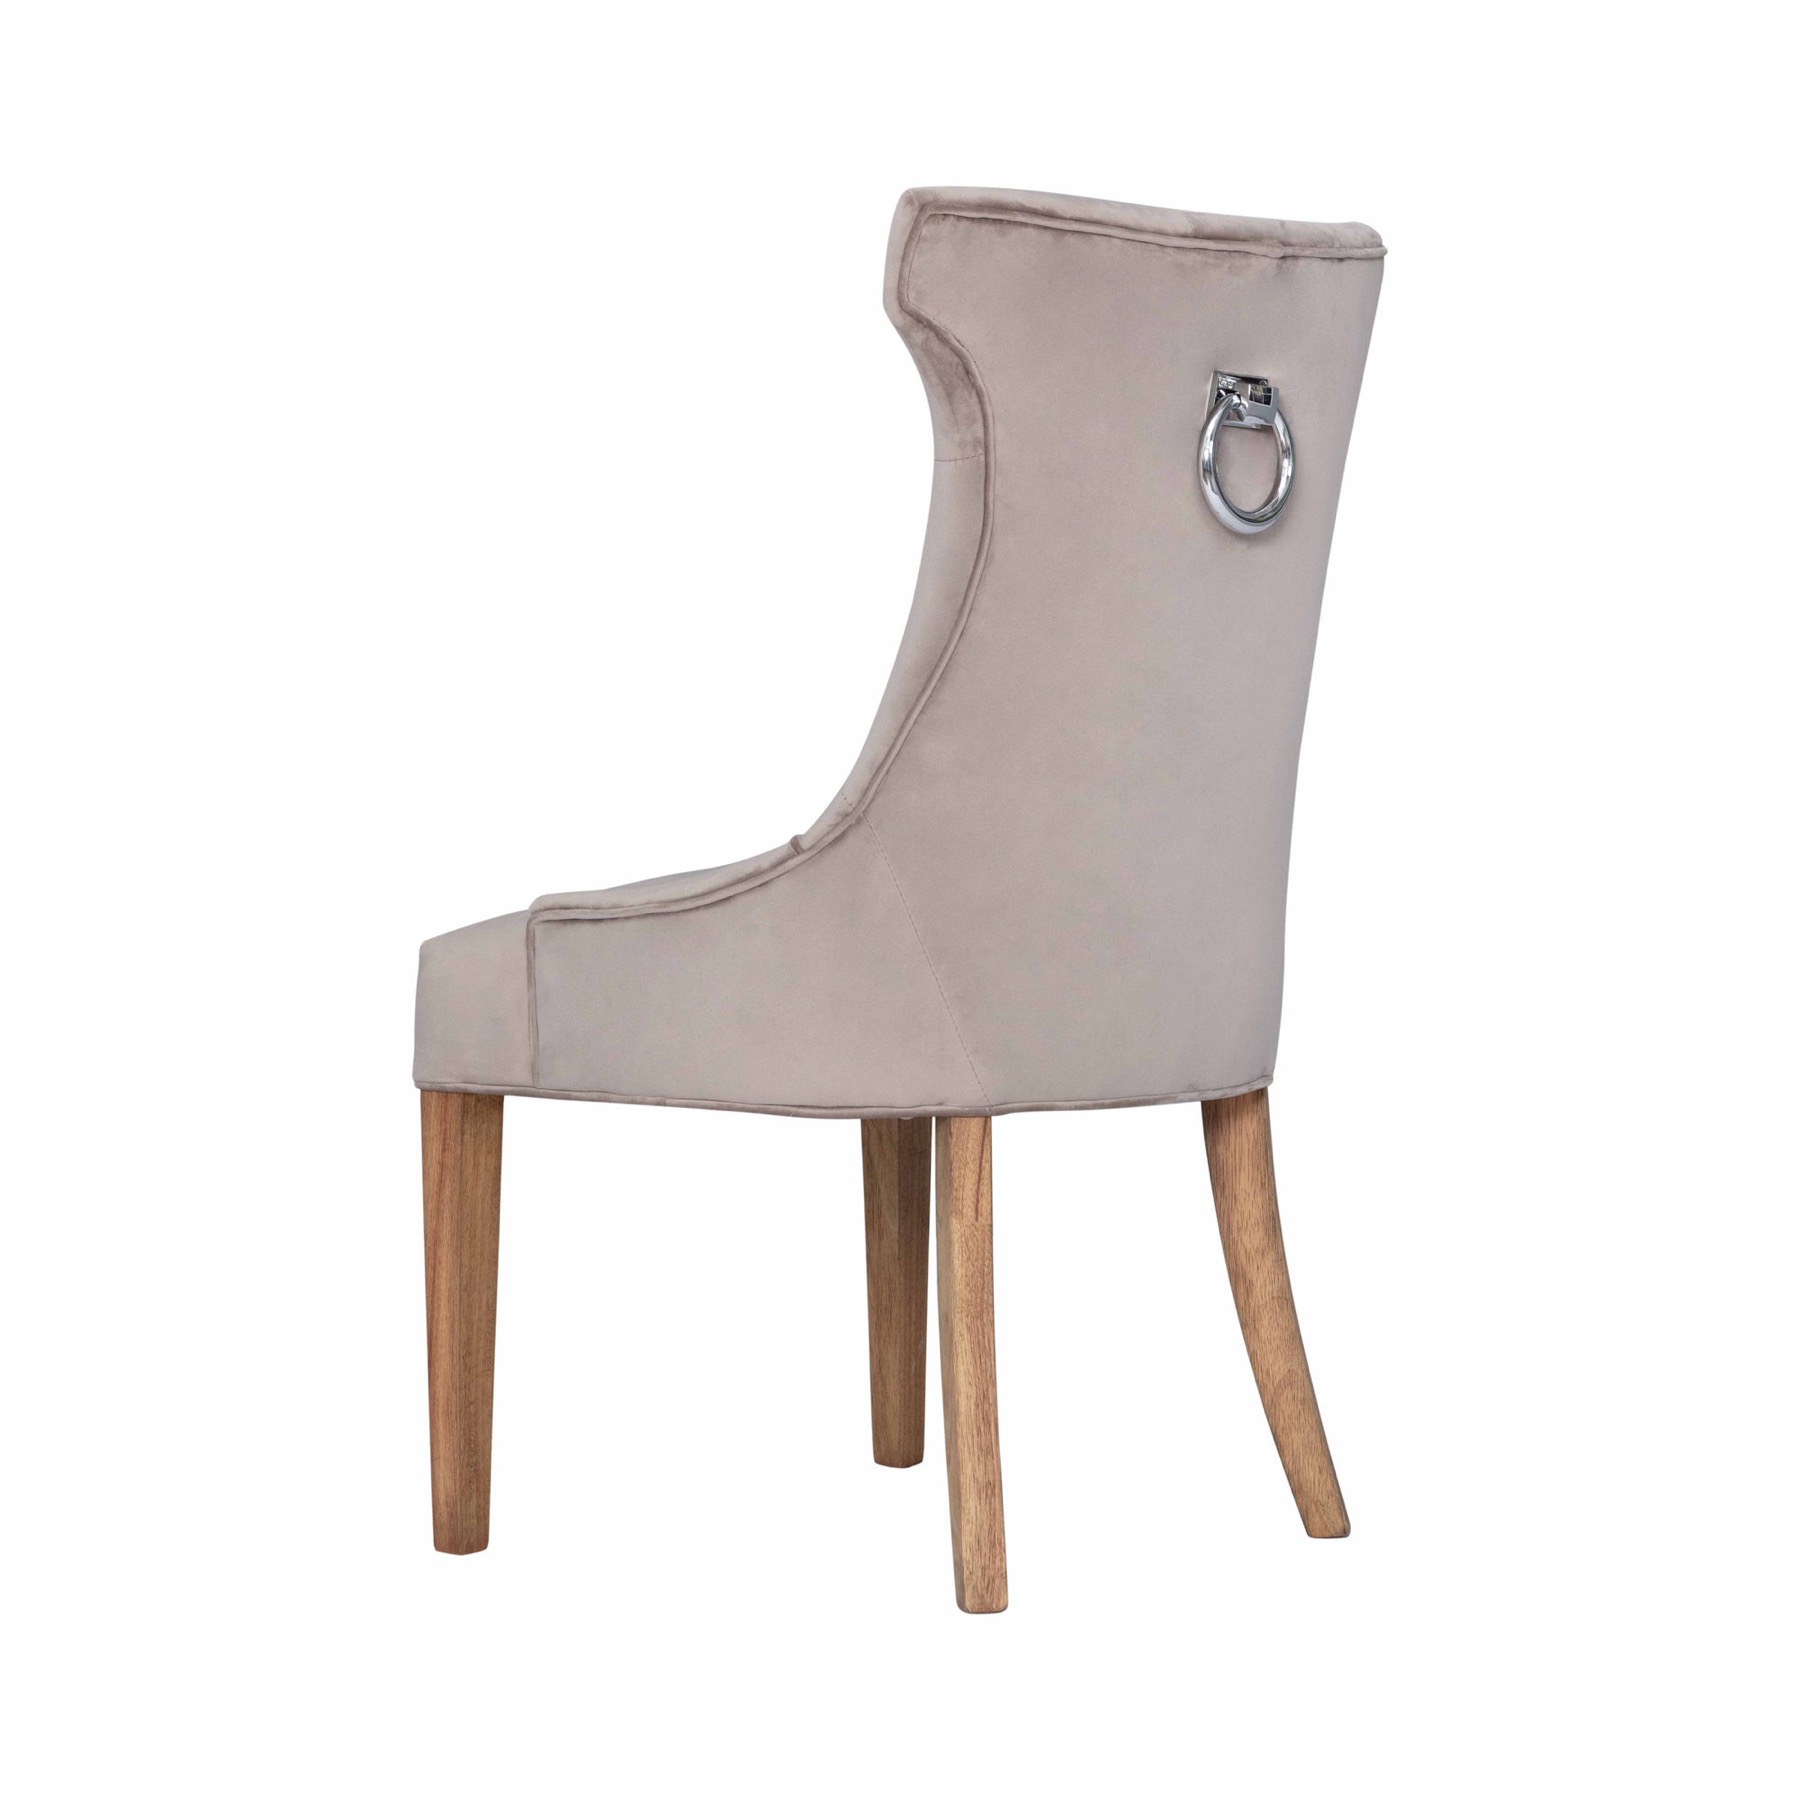 Chelsea High Wing Ring Backed Dining Chair - Image 4